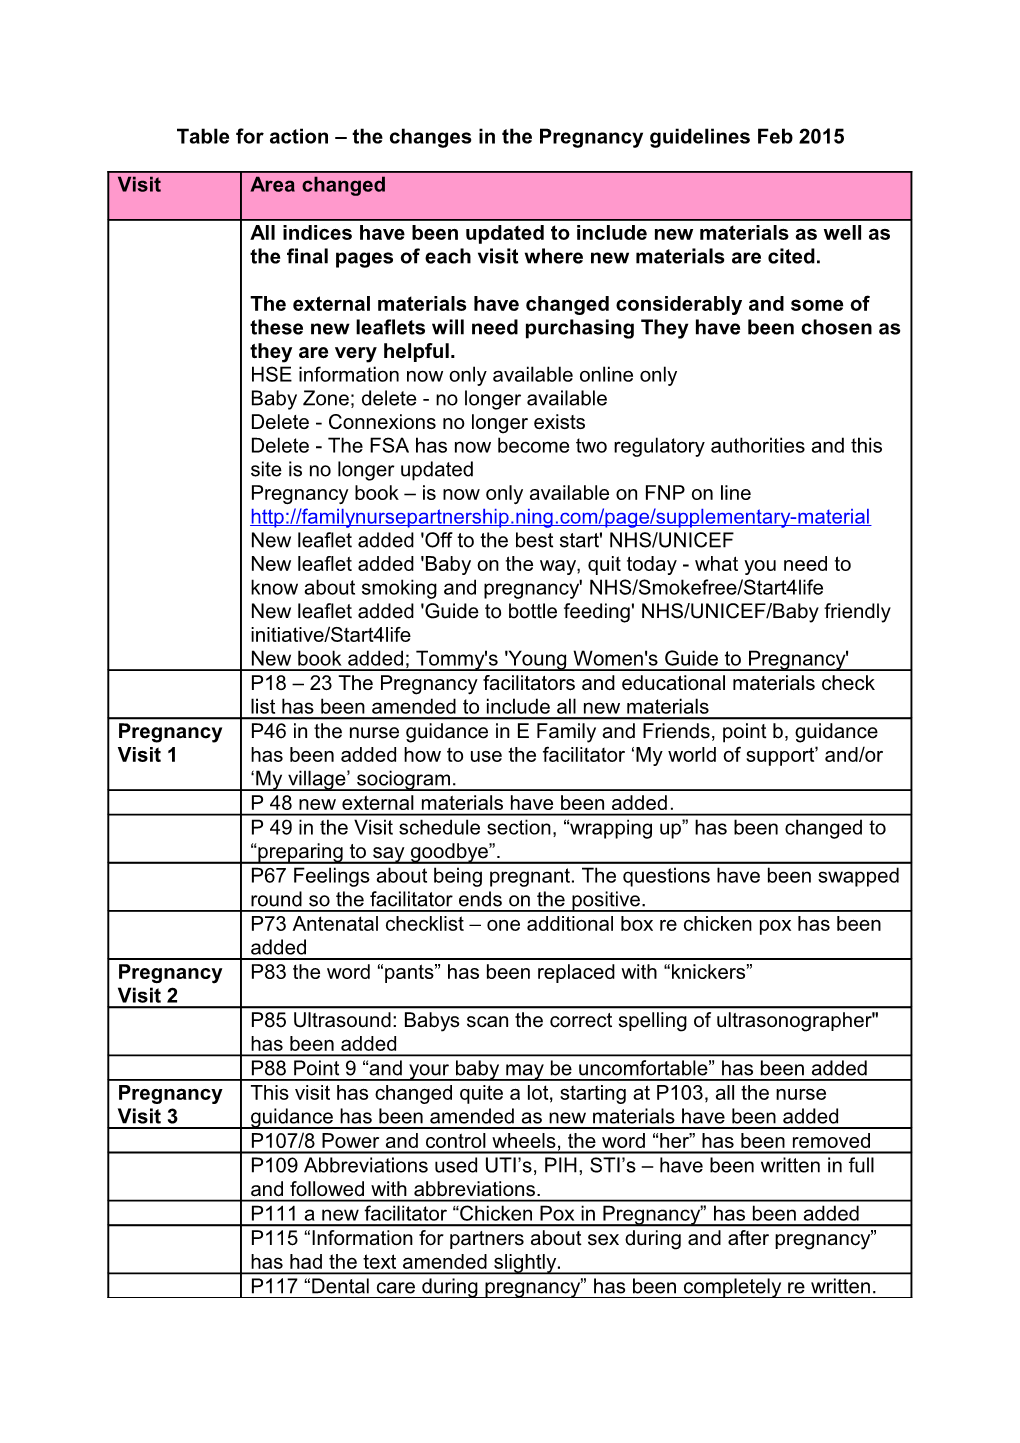 Table for Action to Consider Infancy Guidelines